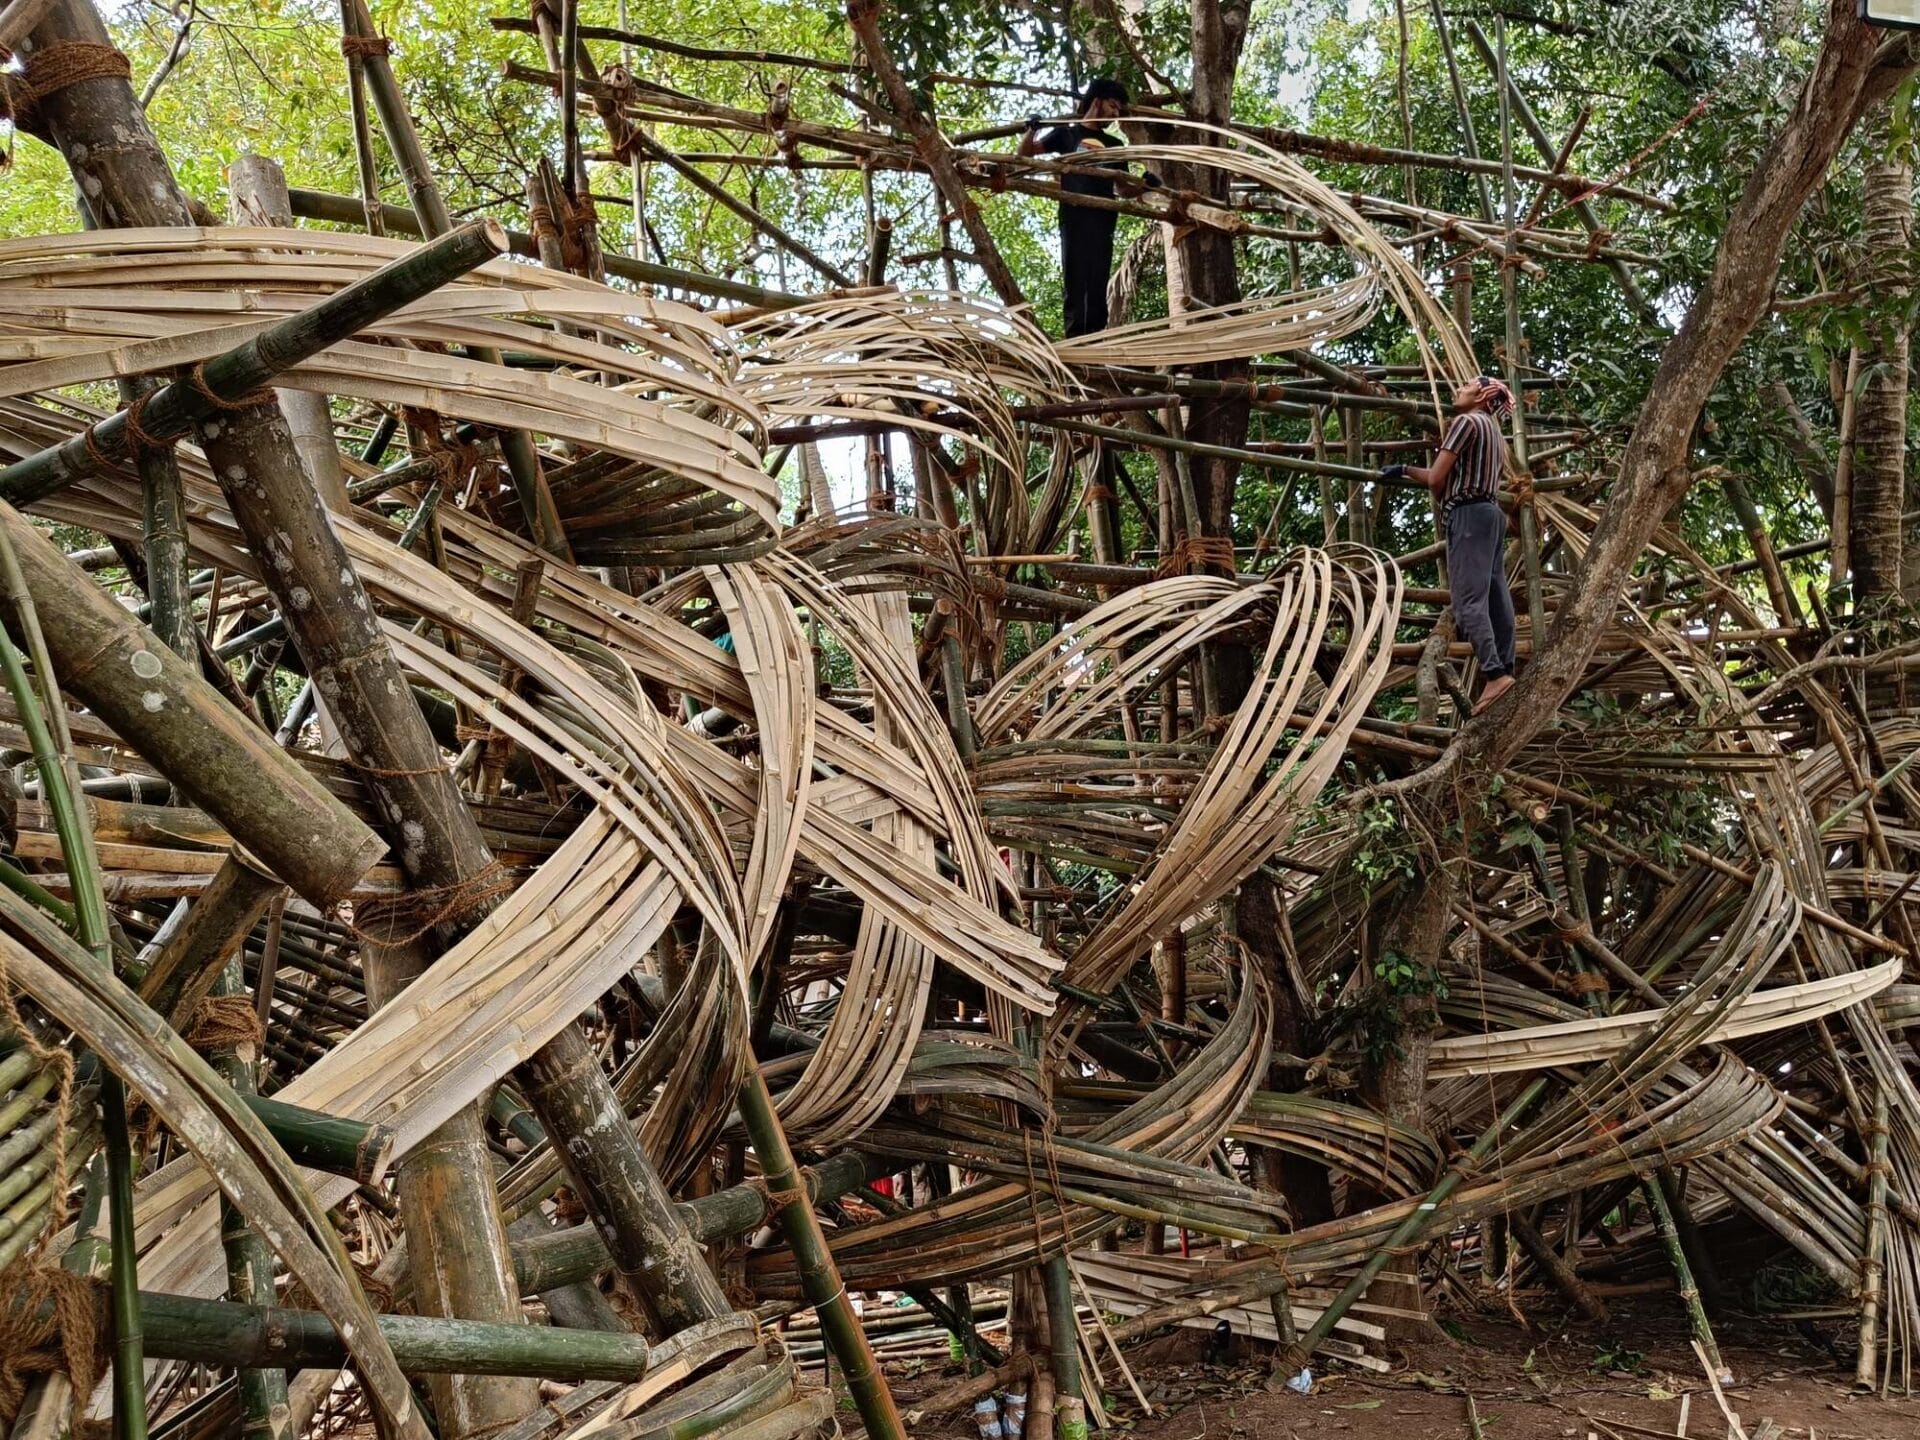 a person climbs a swirling structure in trees